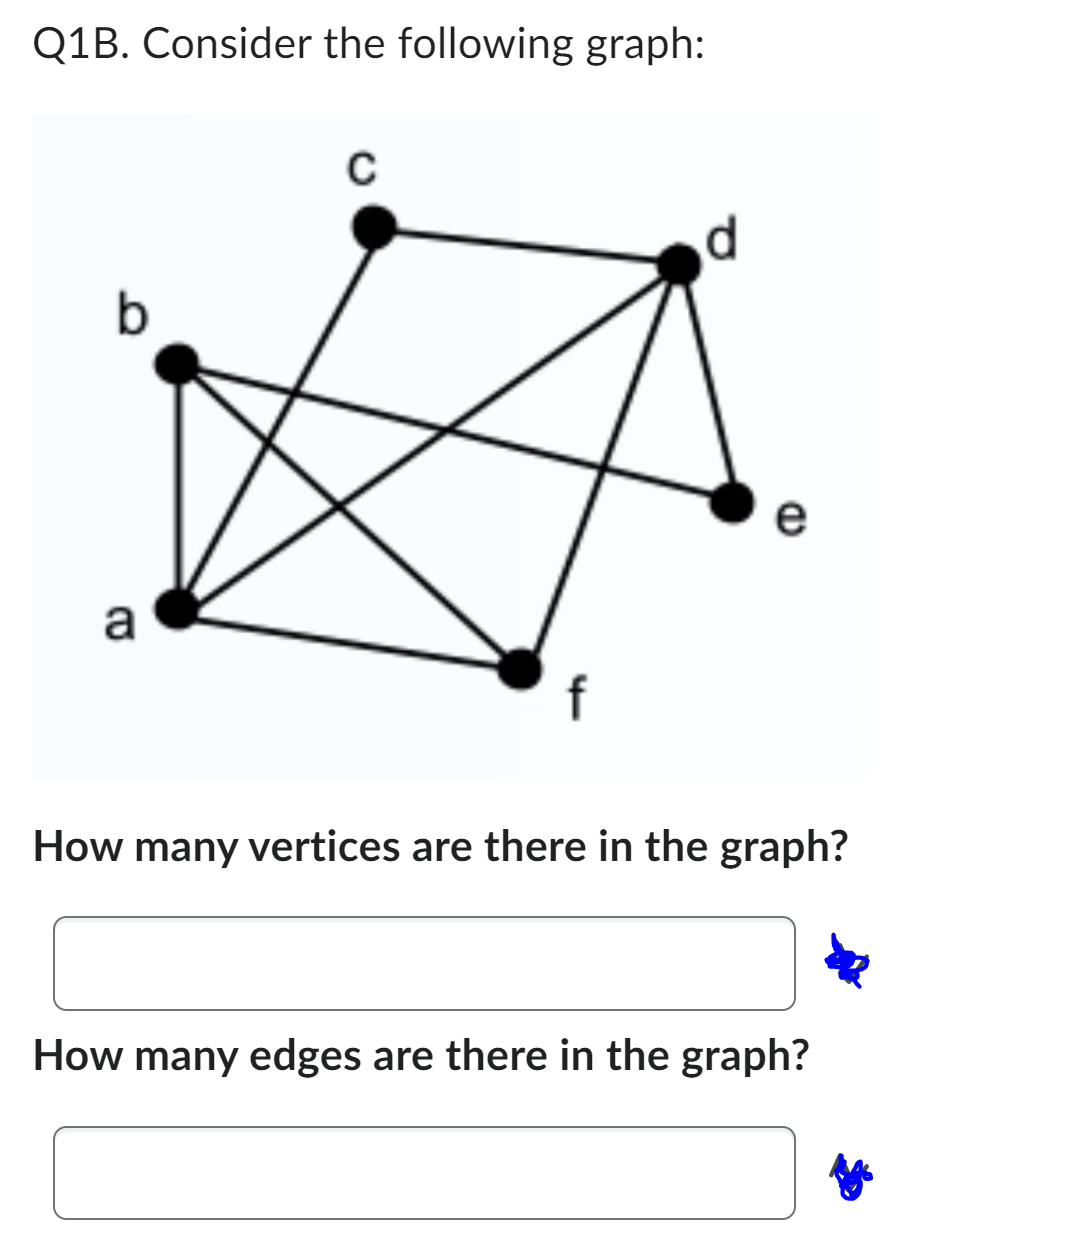 Q1B. Consider the following graph:
a
C
f
e
How many vertices are there in the graph?
How many edges are there in the graph?